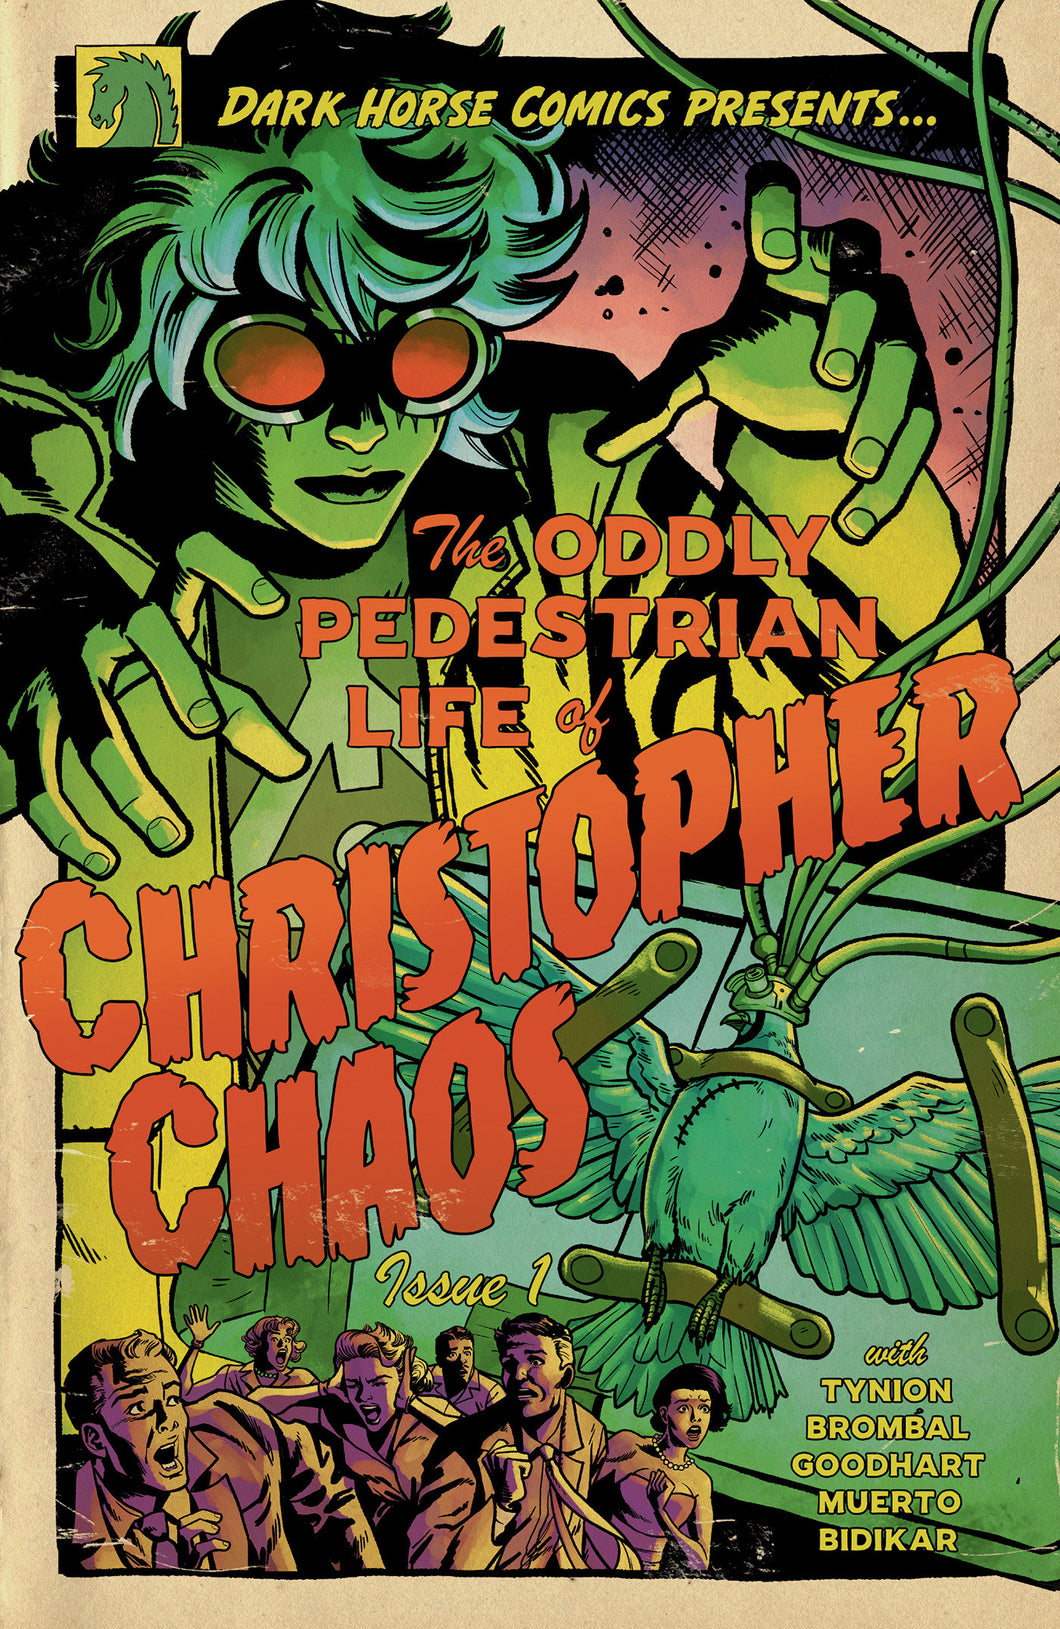 The Oddly Pedestrian Life Of Christopher Chaos #1 (Cover E) (Isaac Goodhart)